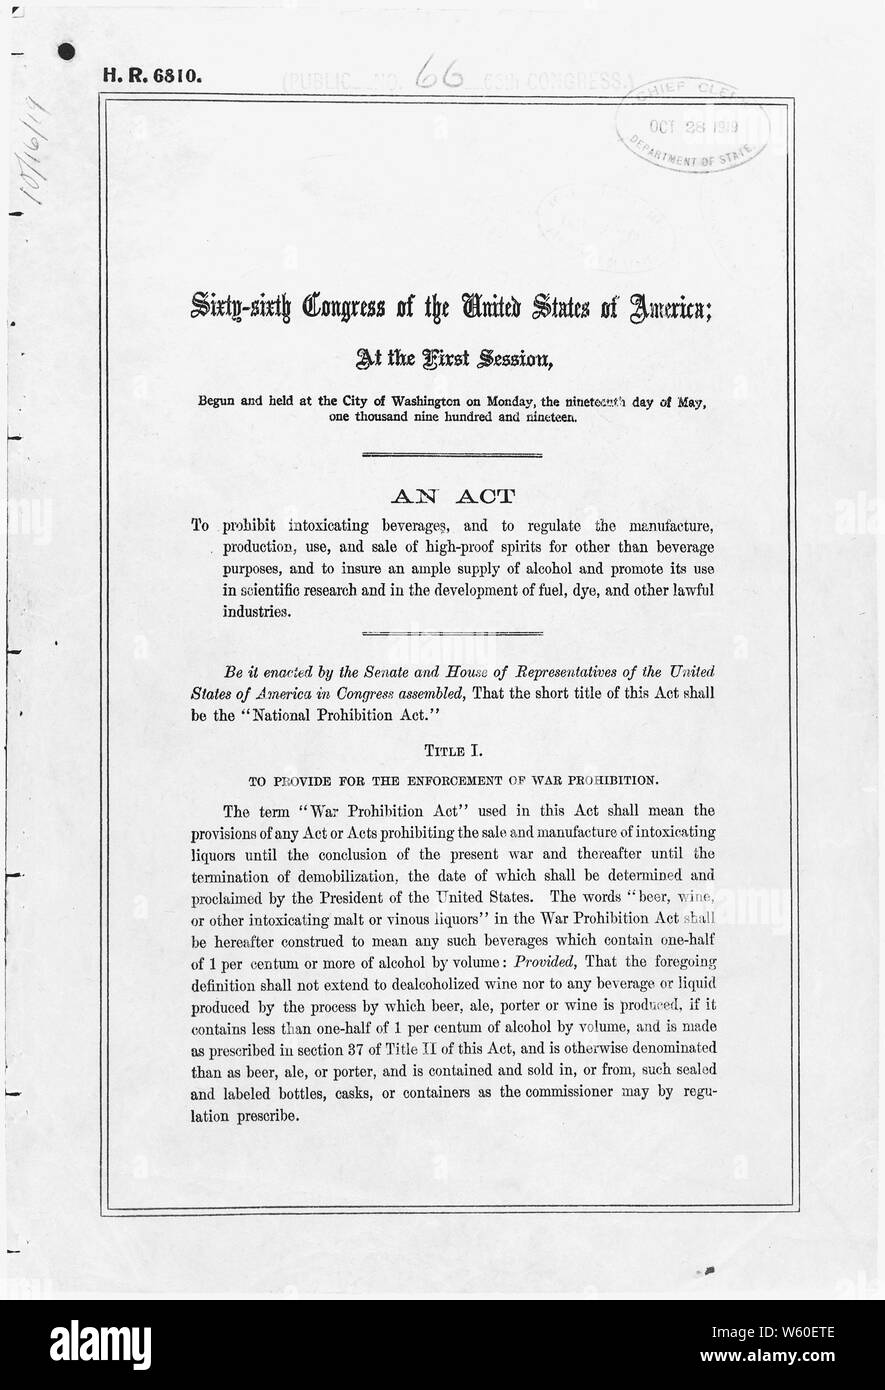 Act of October 28, 1919 [Volstead Act]; Scope and content:  The Volstead Act implemented and provided an enforcement apparatus for the Eighteenth Amendment, which forbade the manufacture, transportation, and sale of intoxicating beverages. Circumvention of the law led to bootlegging and the rise of organized crime. General notes:  The text of all federal laws is published in the U.S. Statutes at Large, a multivolume publication at libraries nationwide. The Volstead Act is found in volume 41 of Statutes at Large, pp. 305-323 (41 Stat. 305). Exhibit History: The Written Word Endures, April 1976 Stock Photo